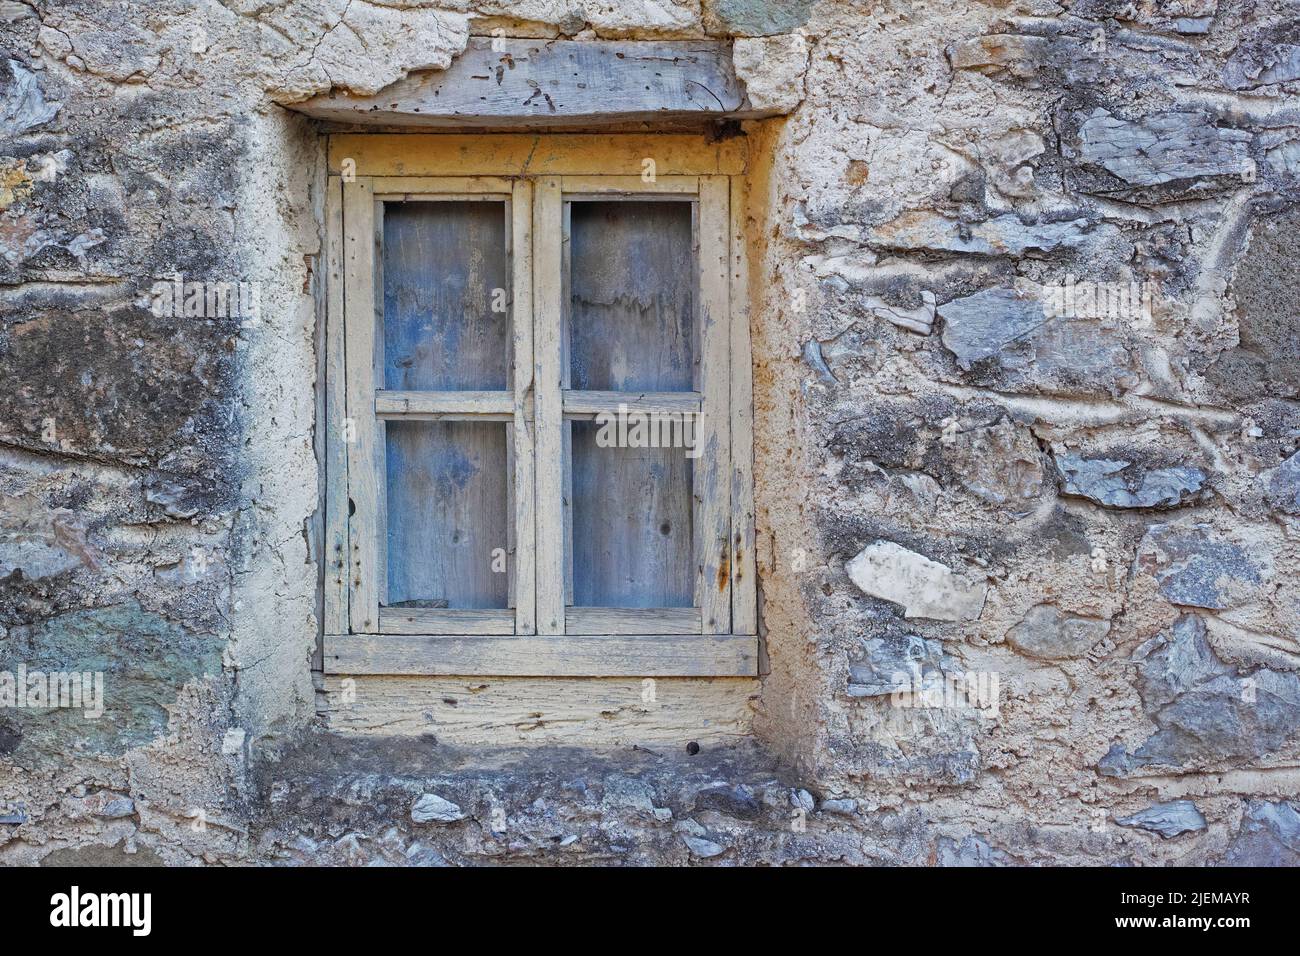 Closeup of a wooden window in a stone wall of an old grey house. Boarded up square window frame in a historic rustic building. Architecture and Stock Photo